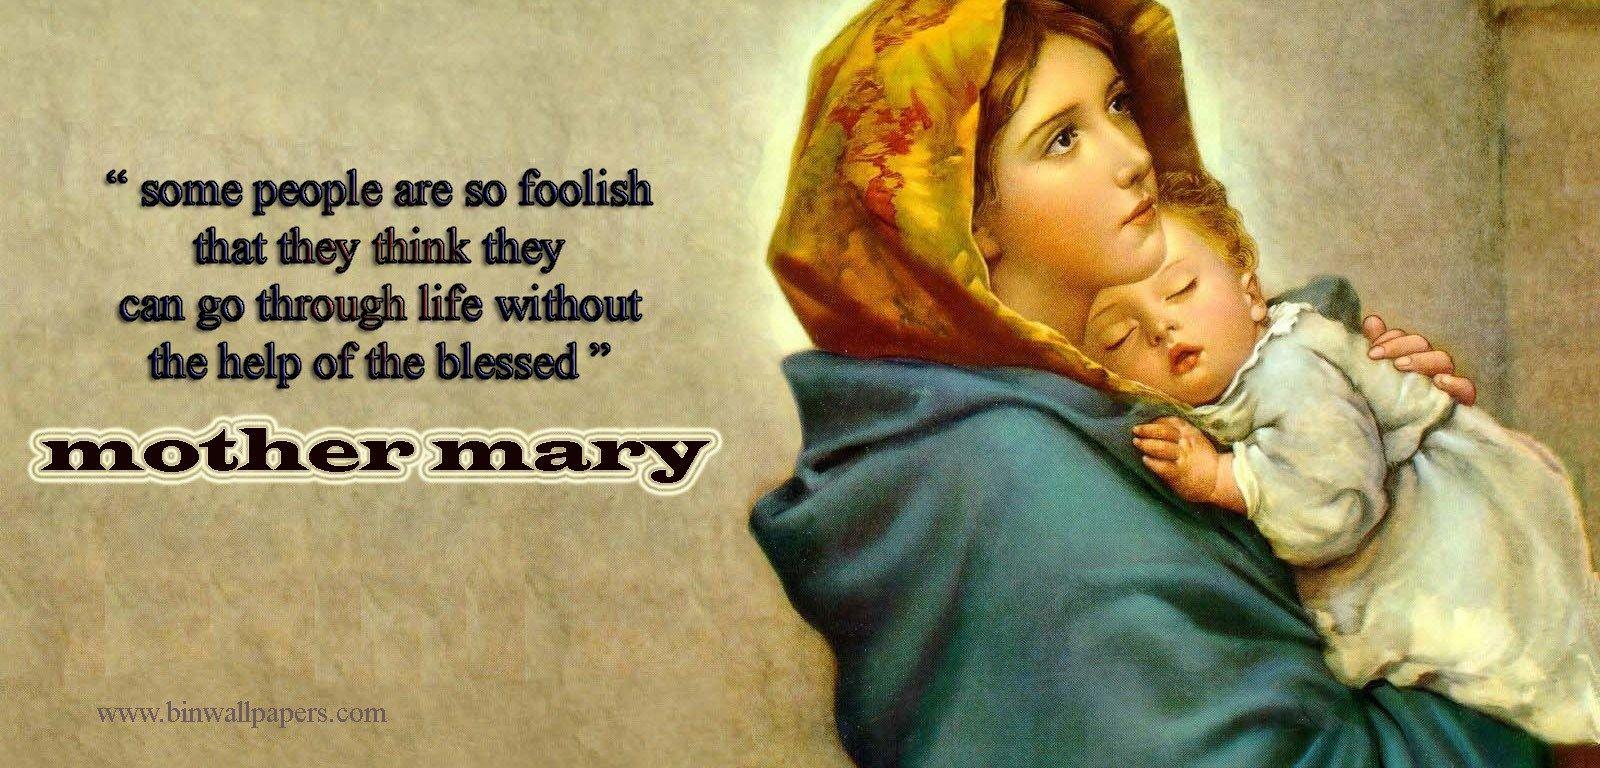 mother mary and baby jesus wallpaper Wallppapers Gallery